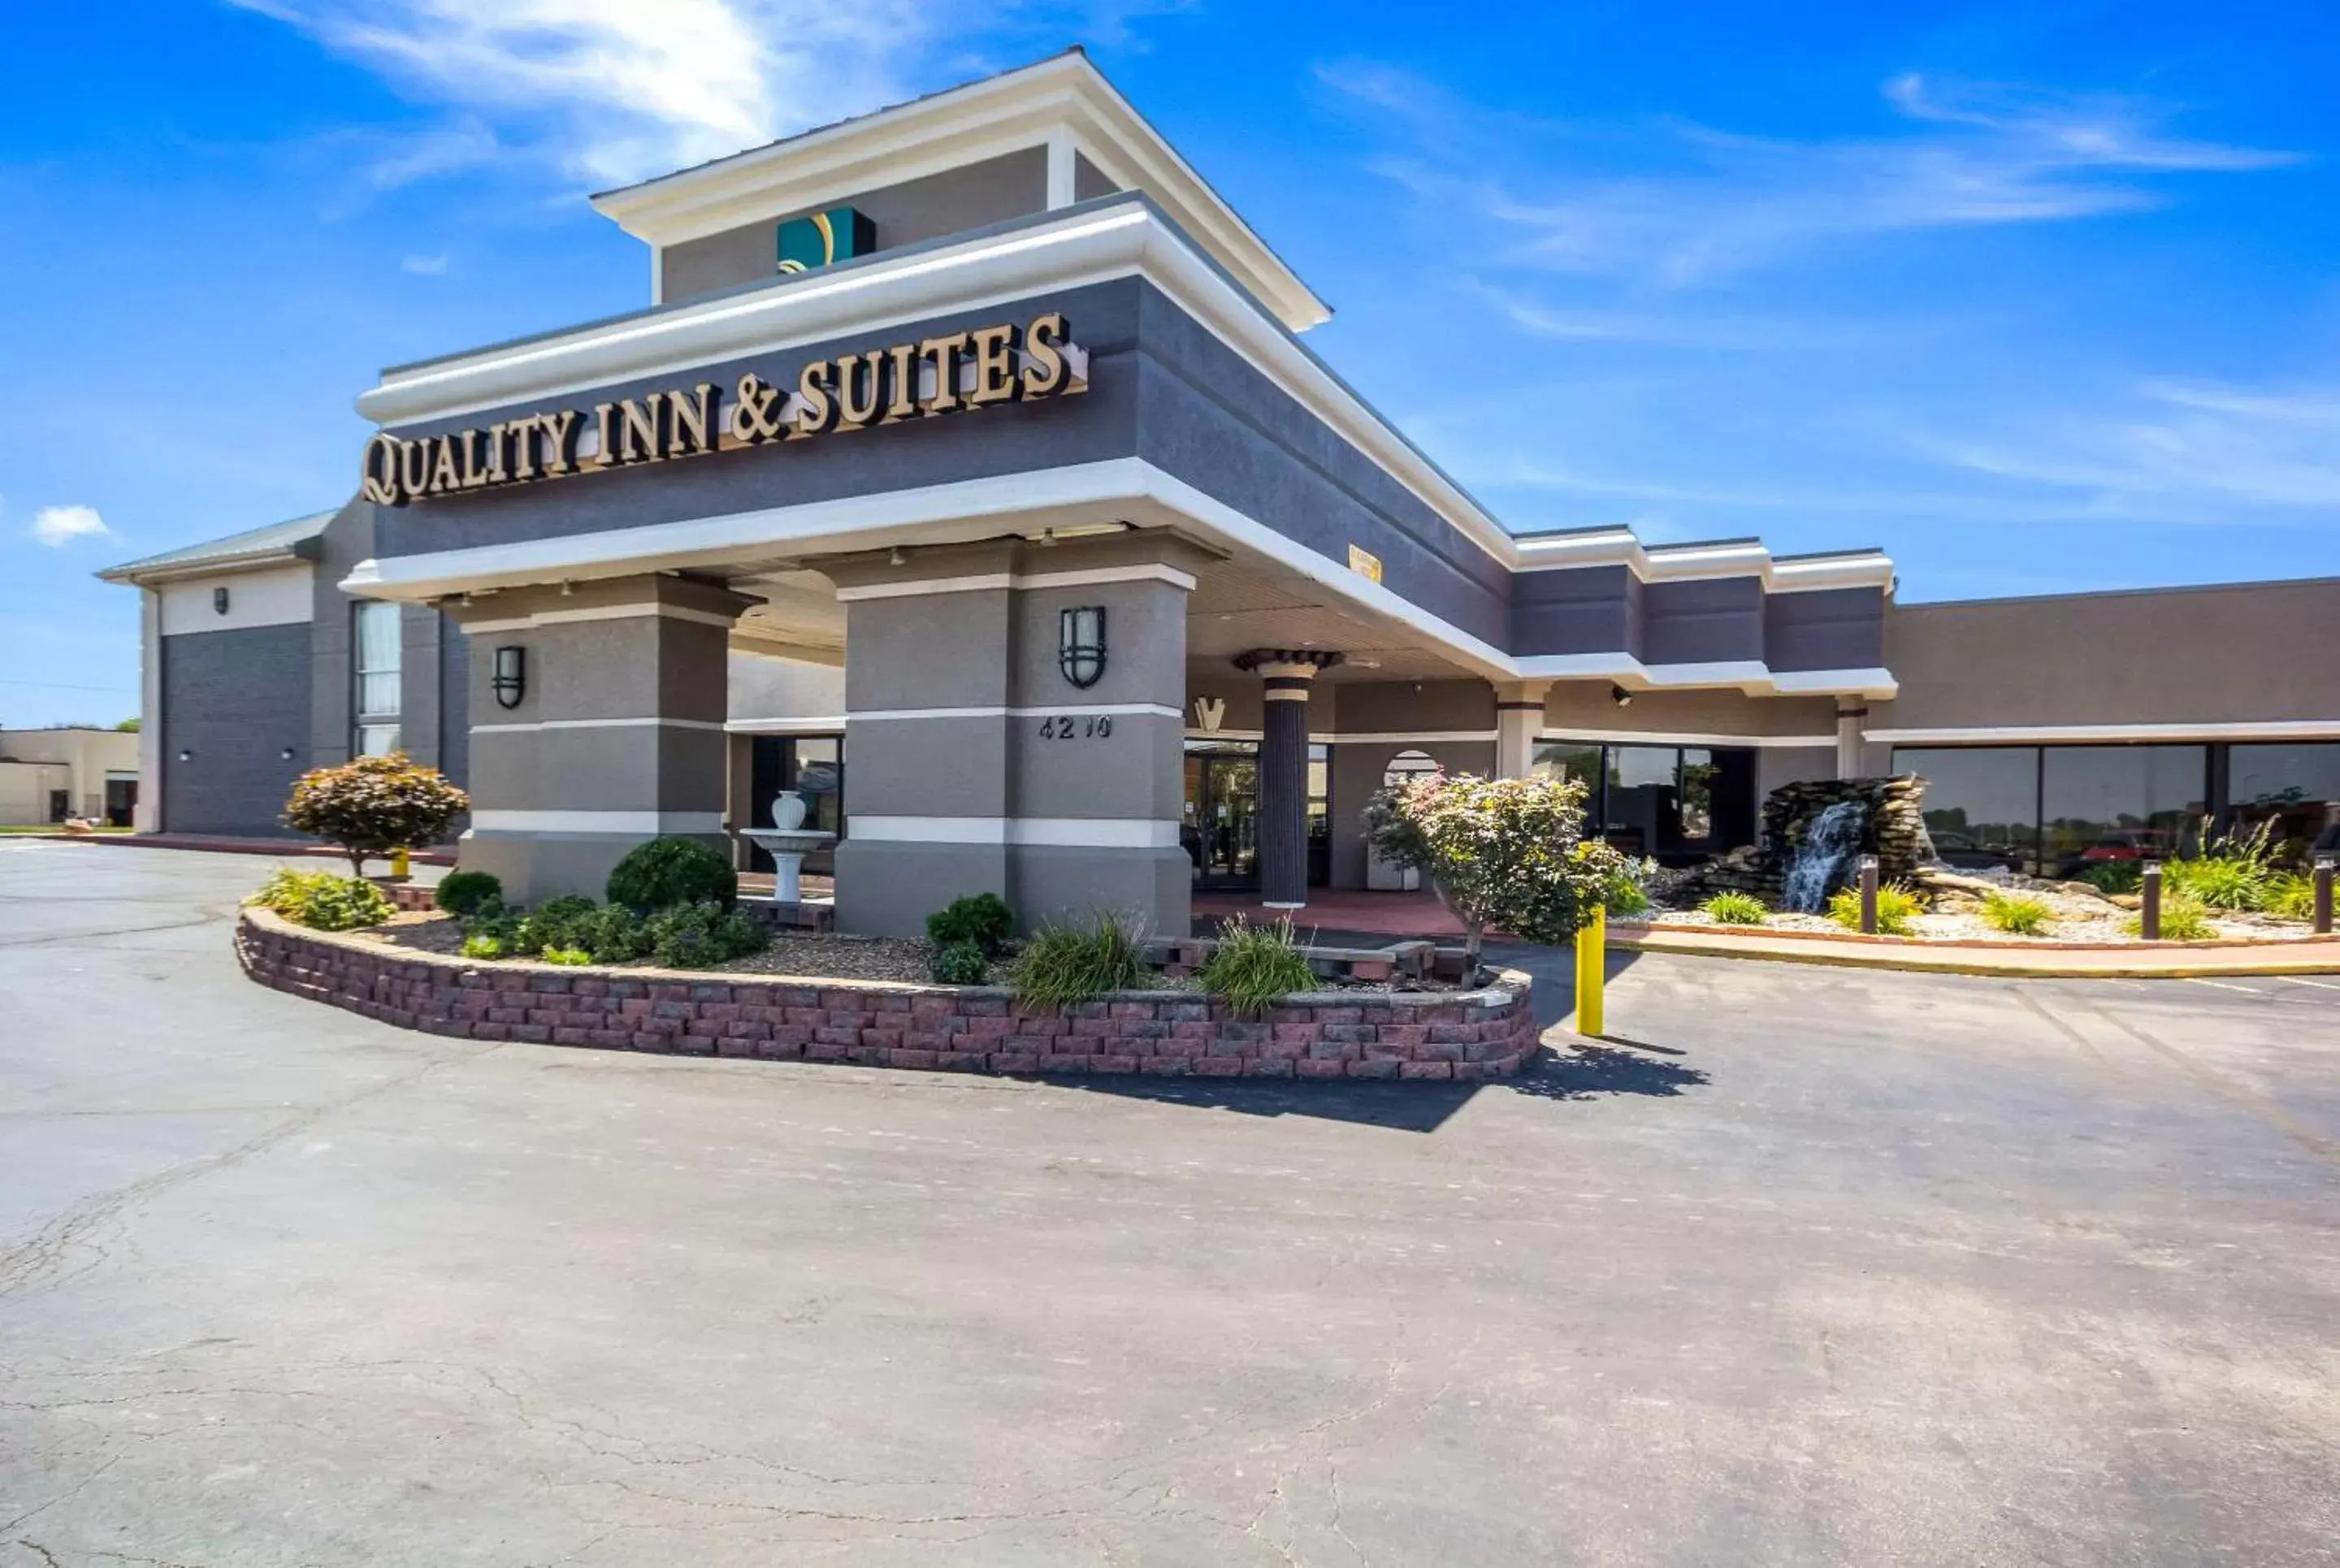 Property building in Quality Inn & Suites Kansas City - Independence I-70 East